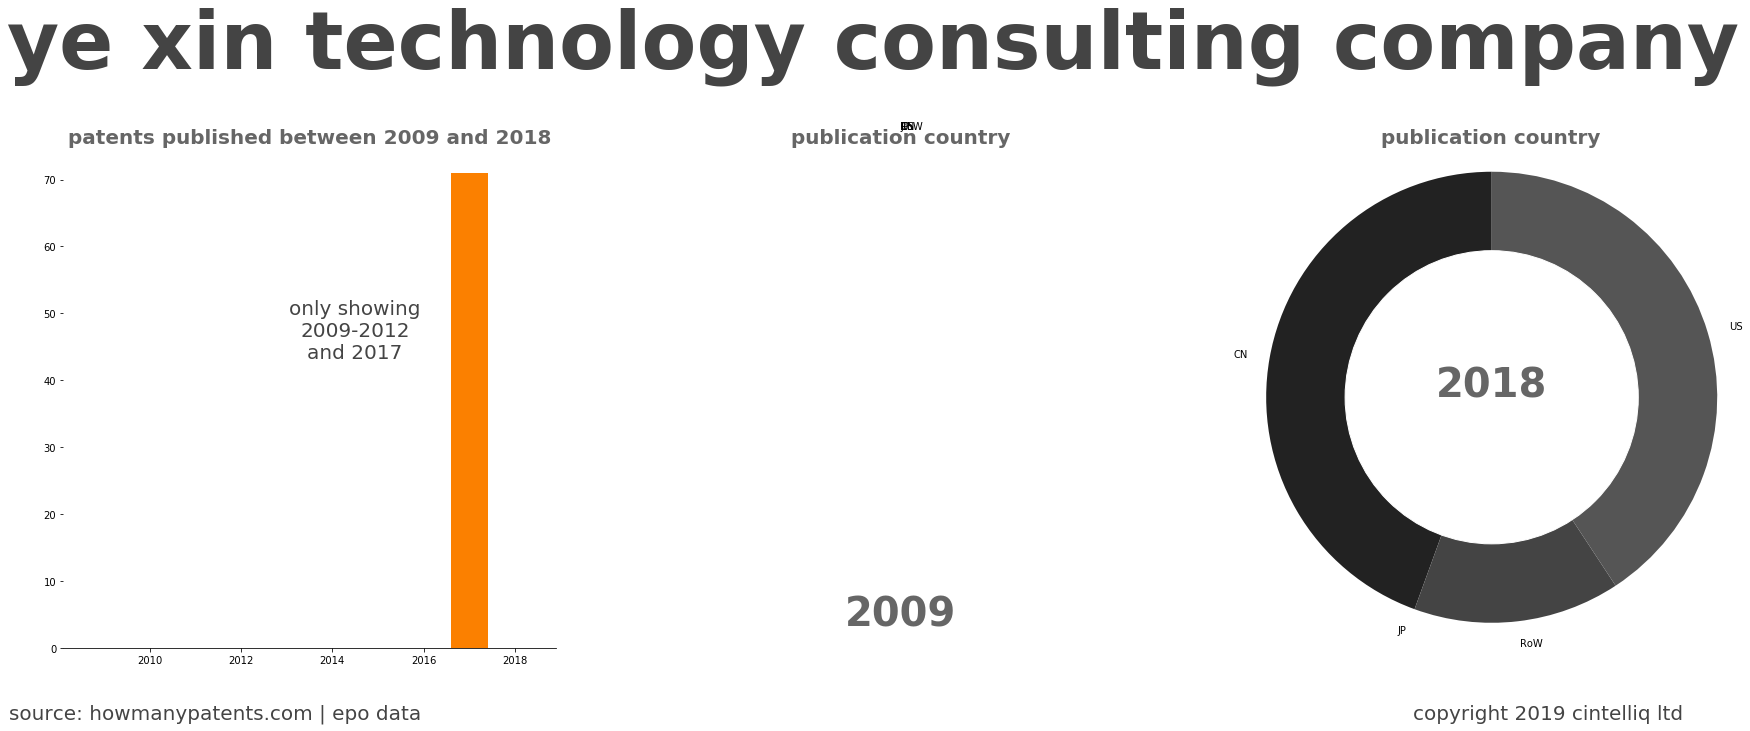 summary of patents for Ye Xin Technology Consulting Company